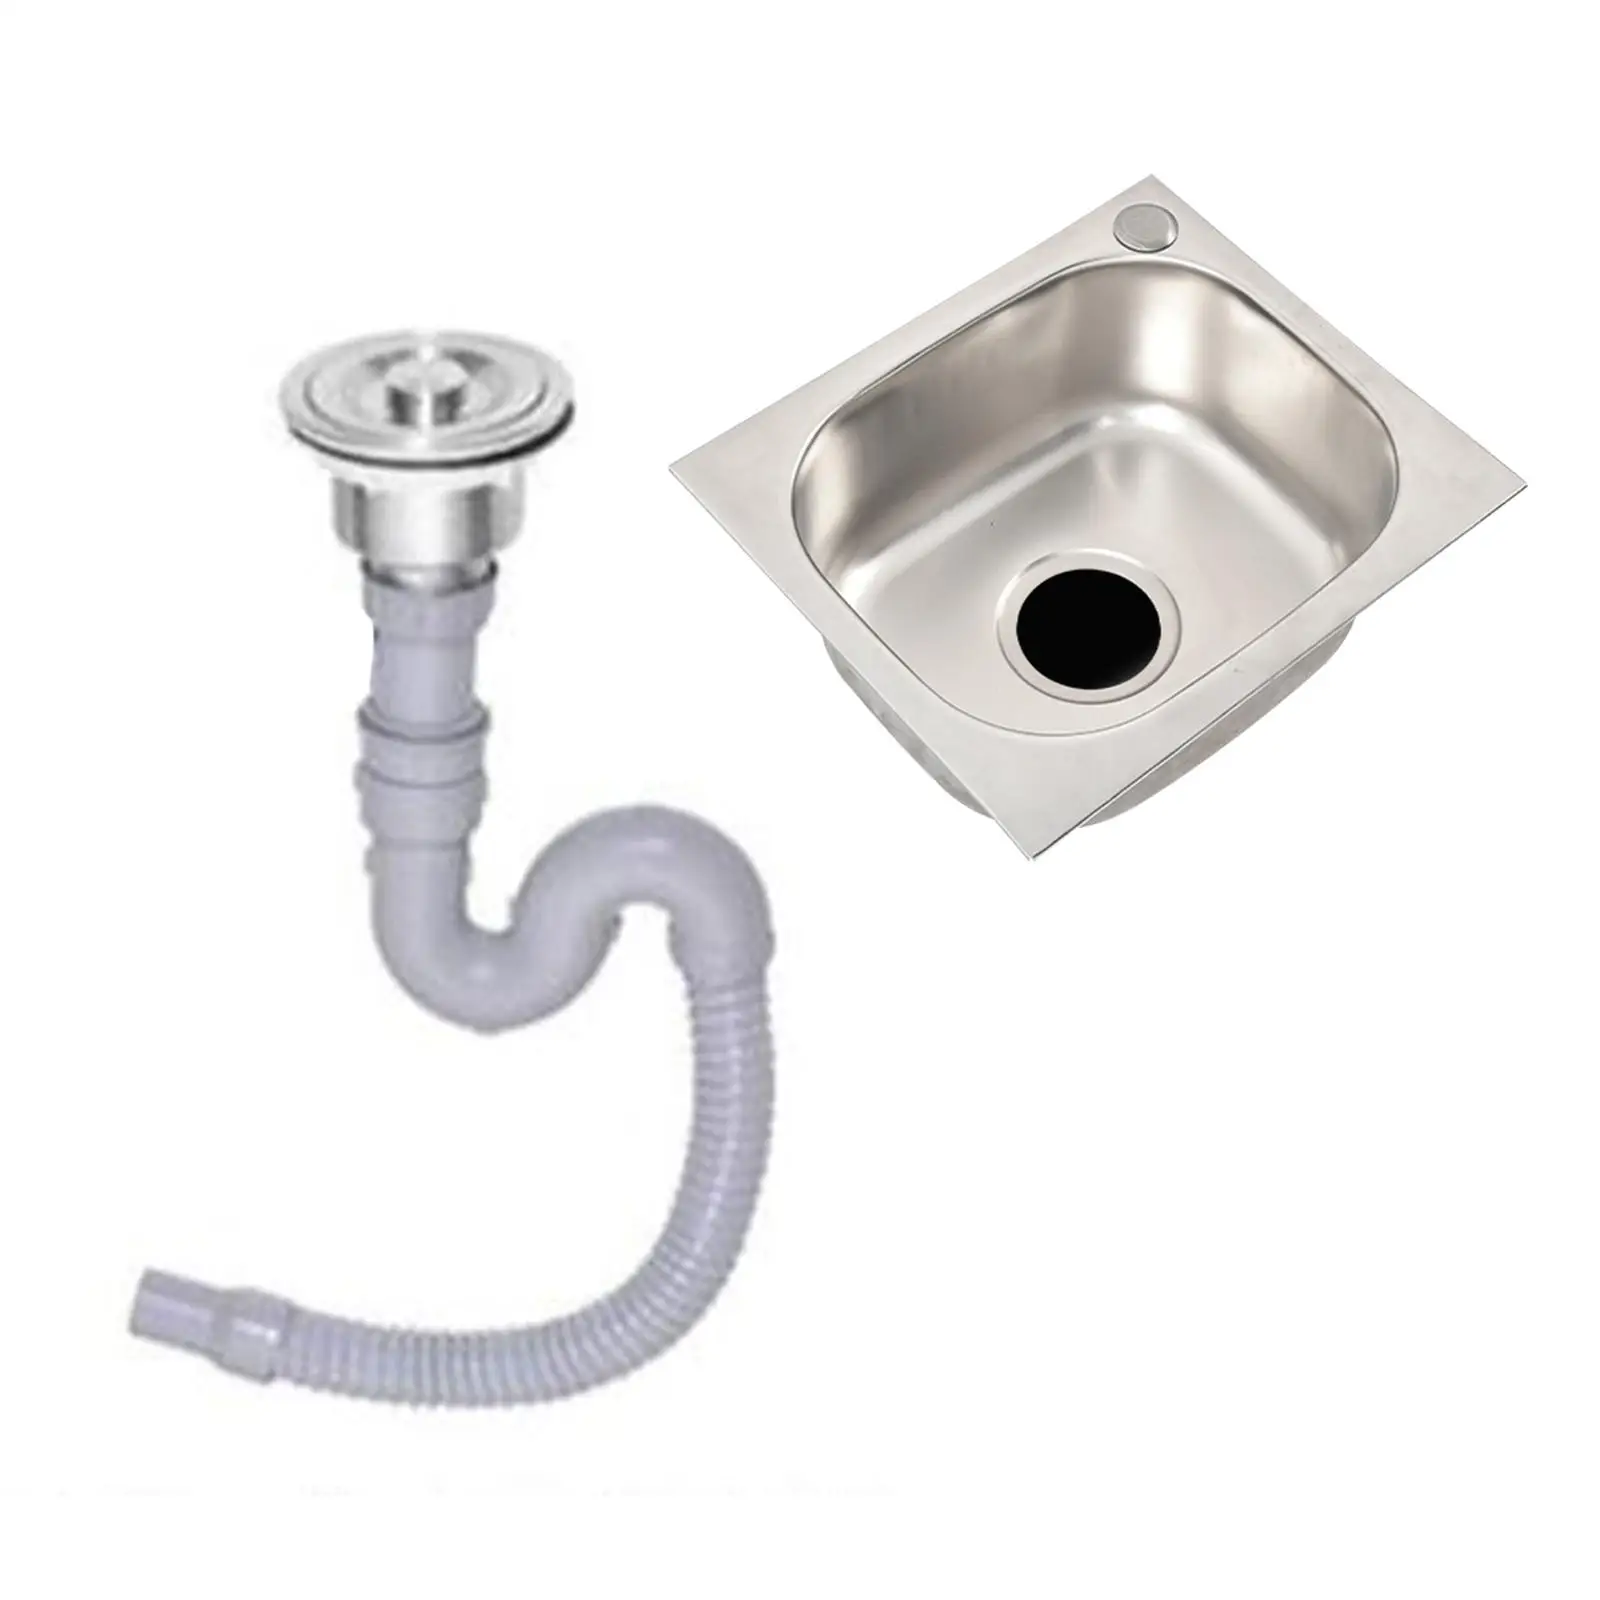 Stainless Steel Kitchen Sink with Drain Hole Fast Drainage Rustproof 37cmx32cmx14cm with Water Pipe Rectangle Single Bowl